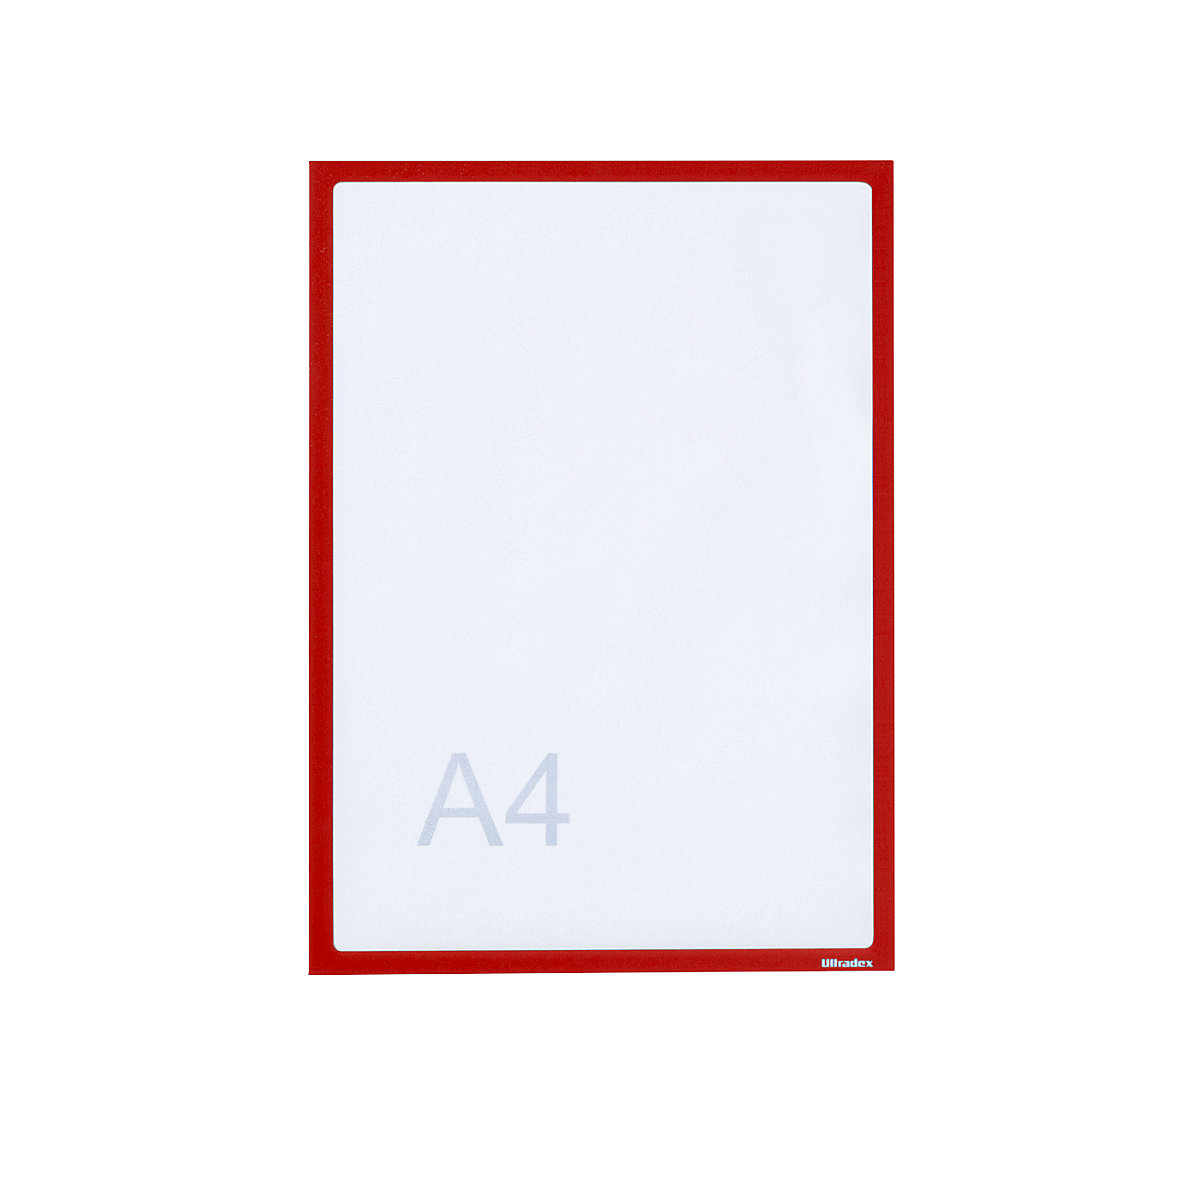 Display pockets for adhesive attachment, A4, WxH 225 x 312 mm, red frame, pack of 25-5